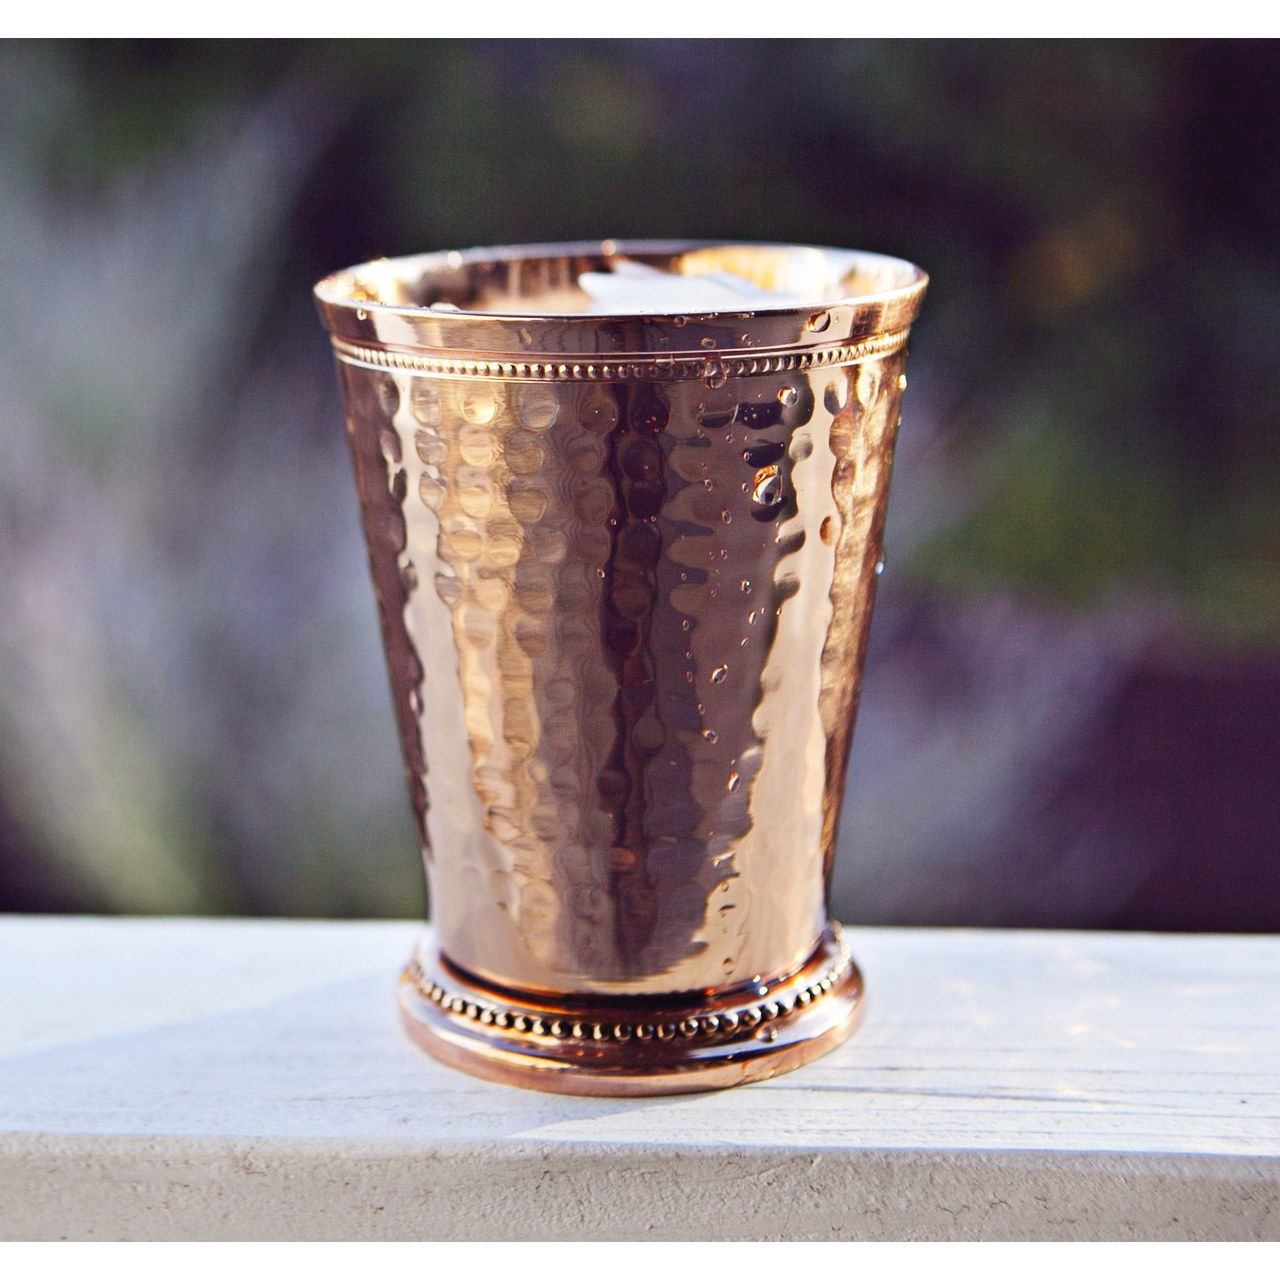 [Alchemade Hammered Copper Mint Julep Cup](http://www.wayfair.com/Hammered-Copper-Mint-Julep-Cup-2412-ALCH1028.html) from Wayfair, $30.45.